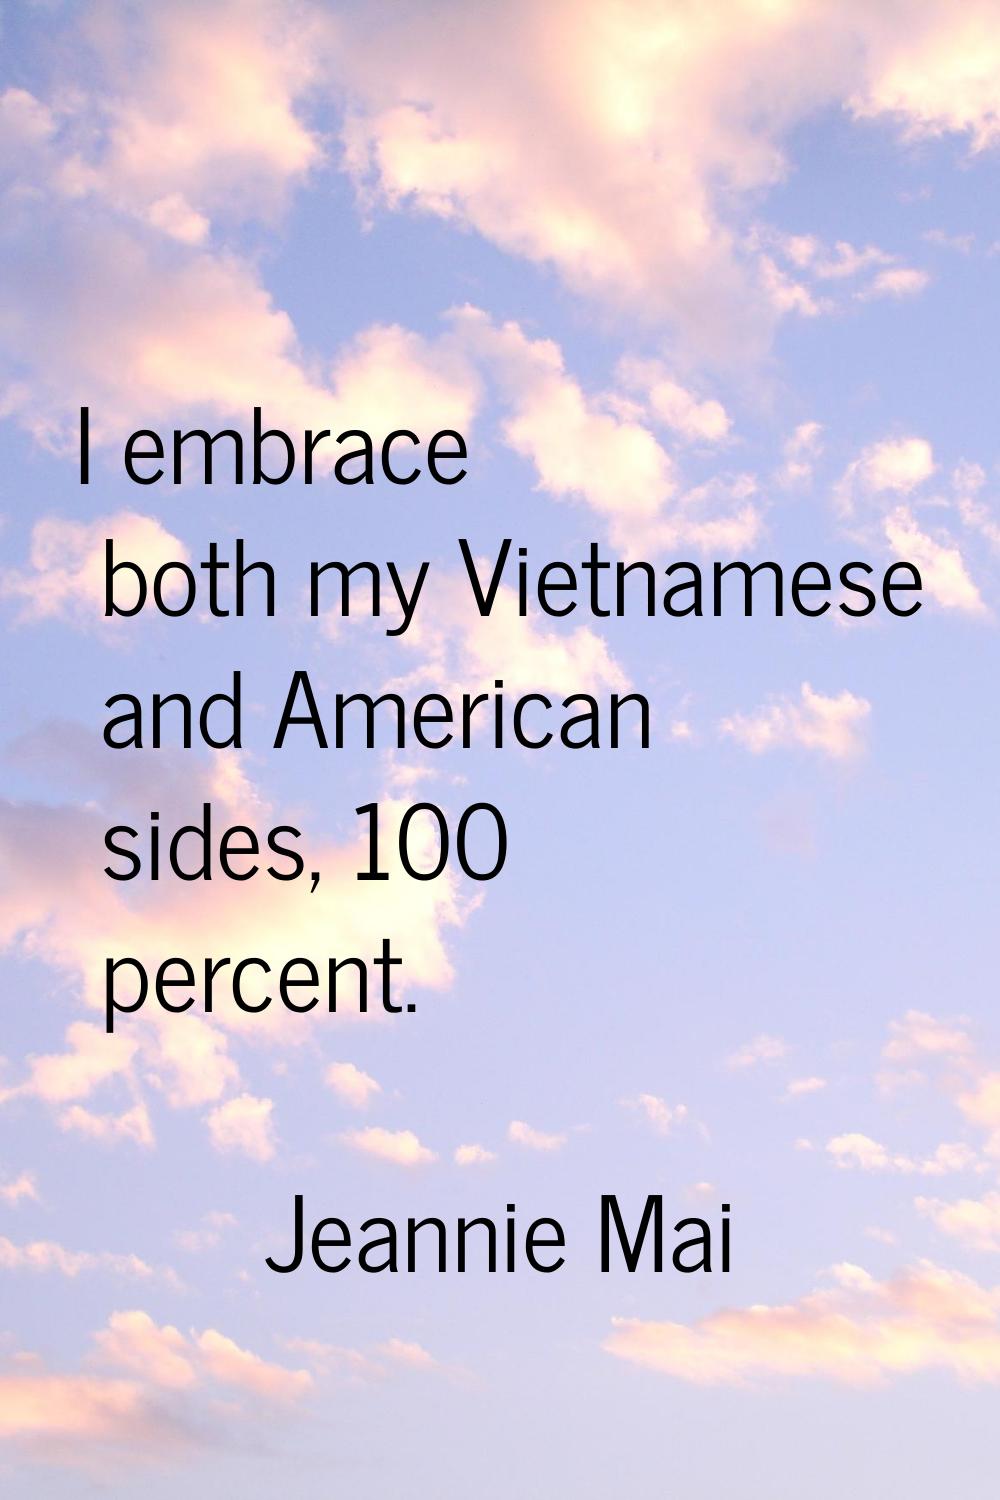 I embrace both my Vietnamese and American sides, 100 percent.